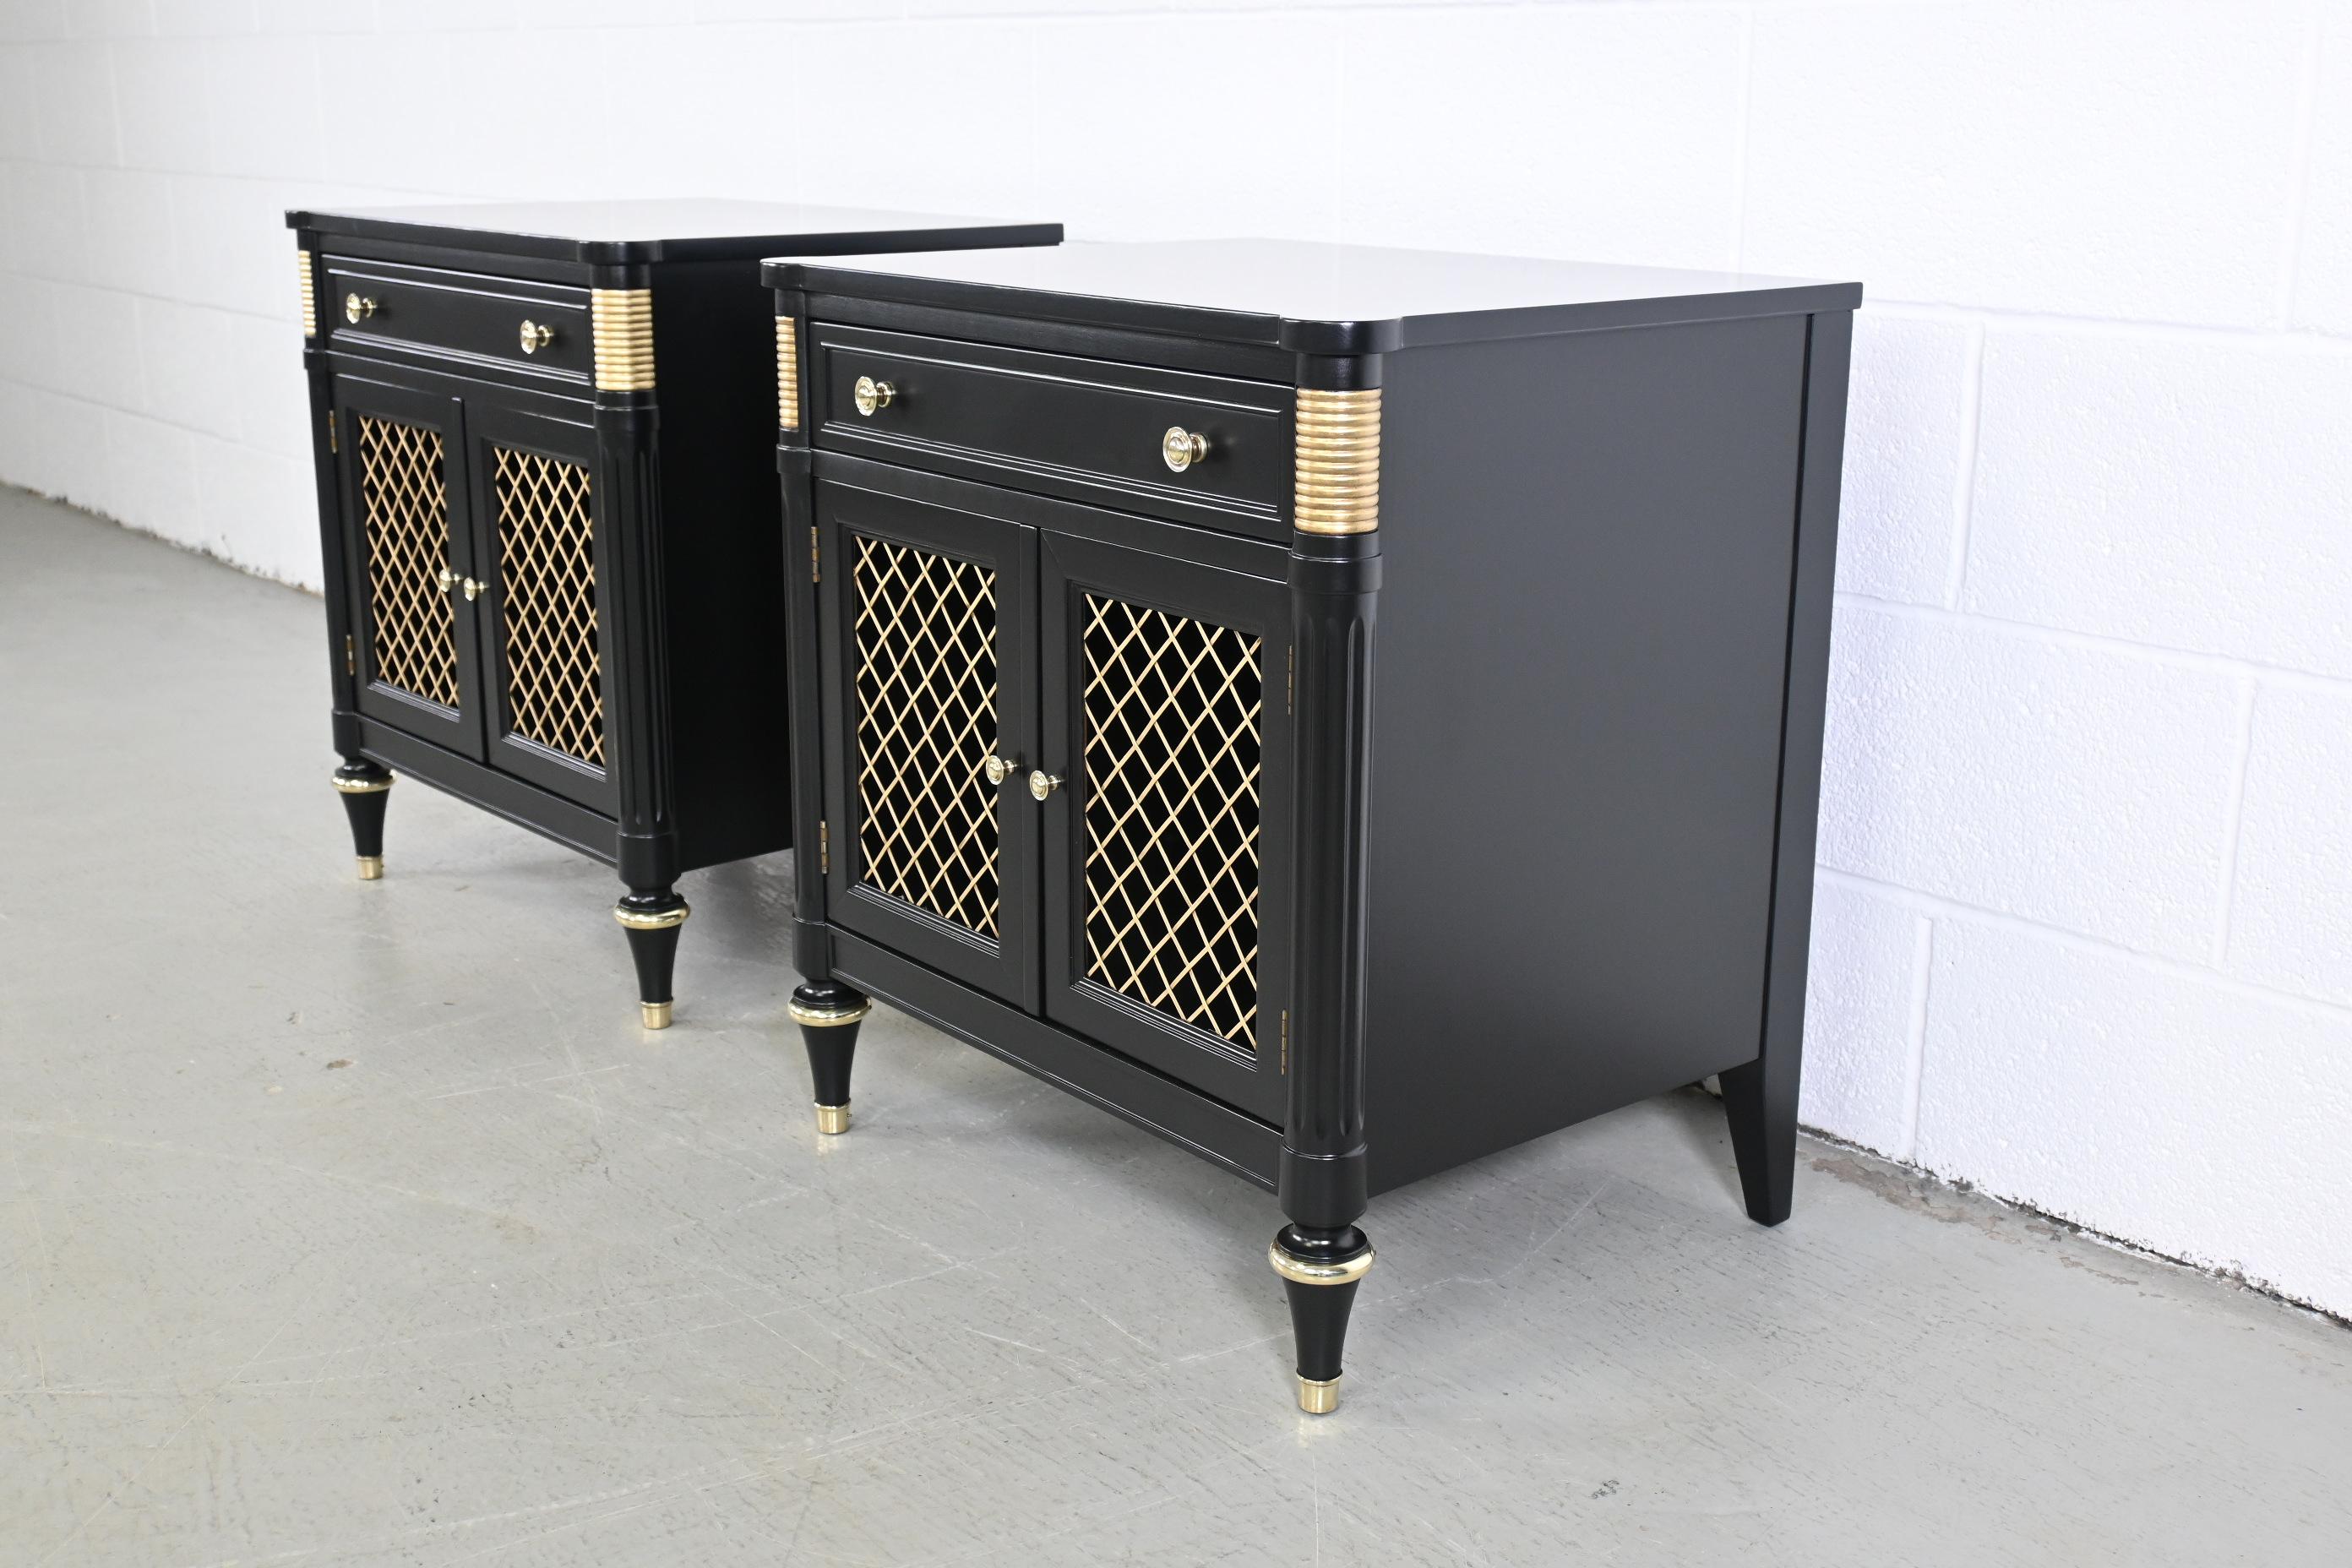 Kindel Furniture French Regency Black Lacquered Pair of Nightstands

Kindel Furniture, USA 1970s

23.75 Wide x 17.5 Deep x 25.25 High.

French regency style black lacquered nightstands with brass hardware and accents.

Professionally